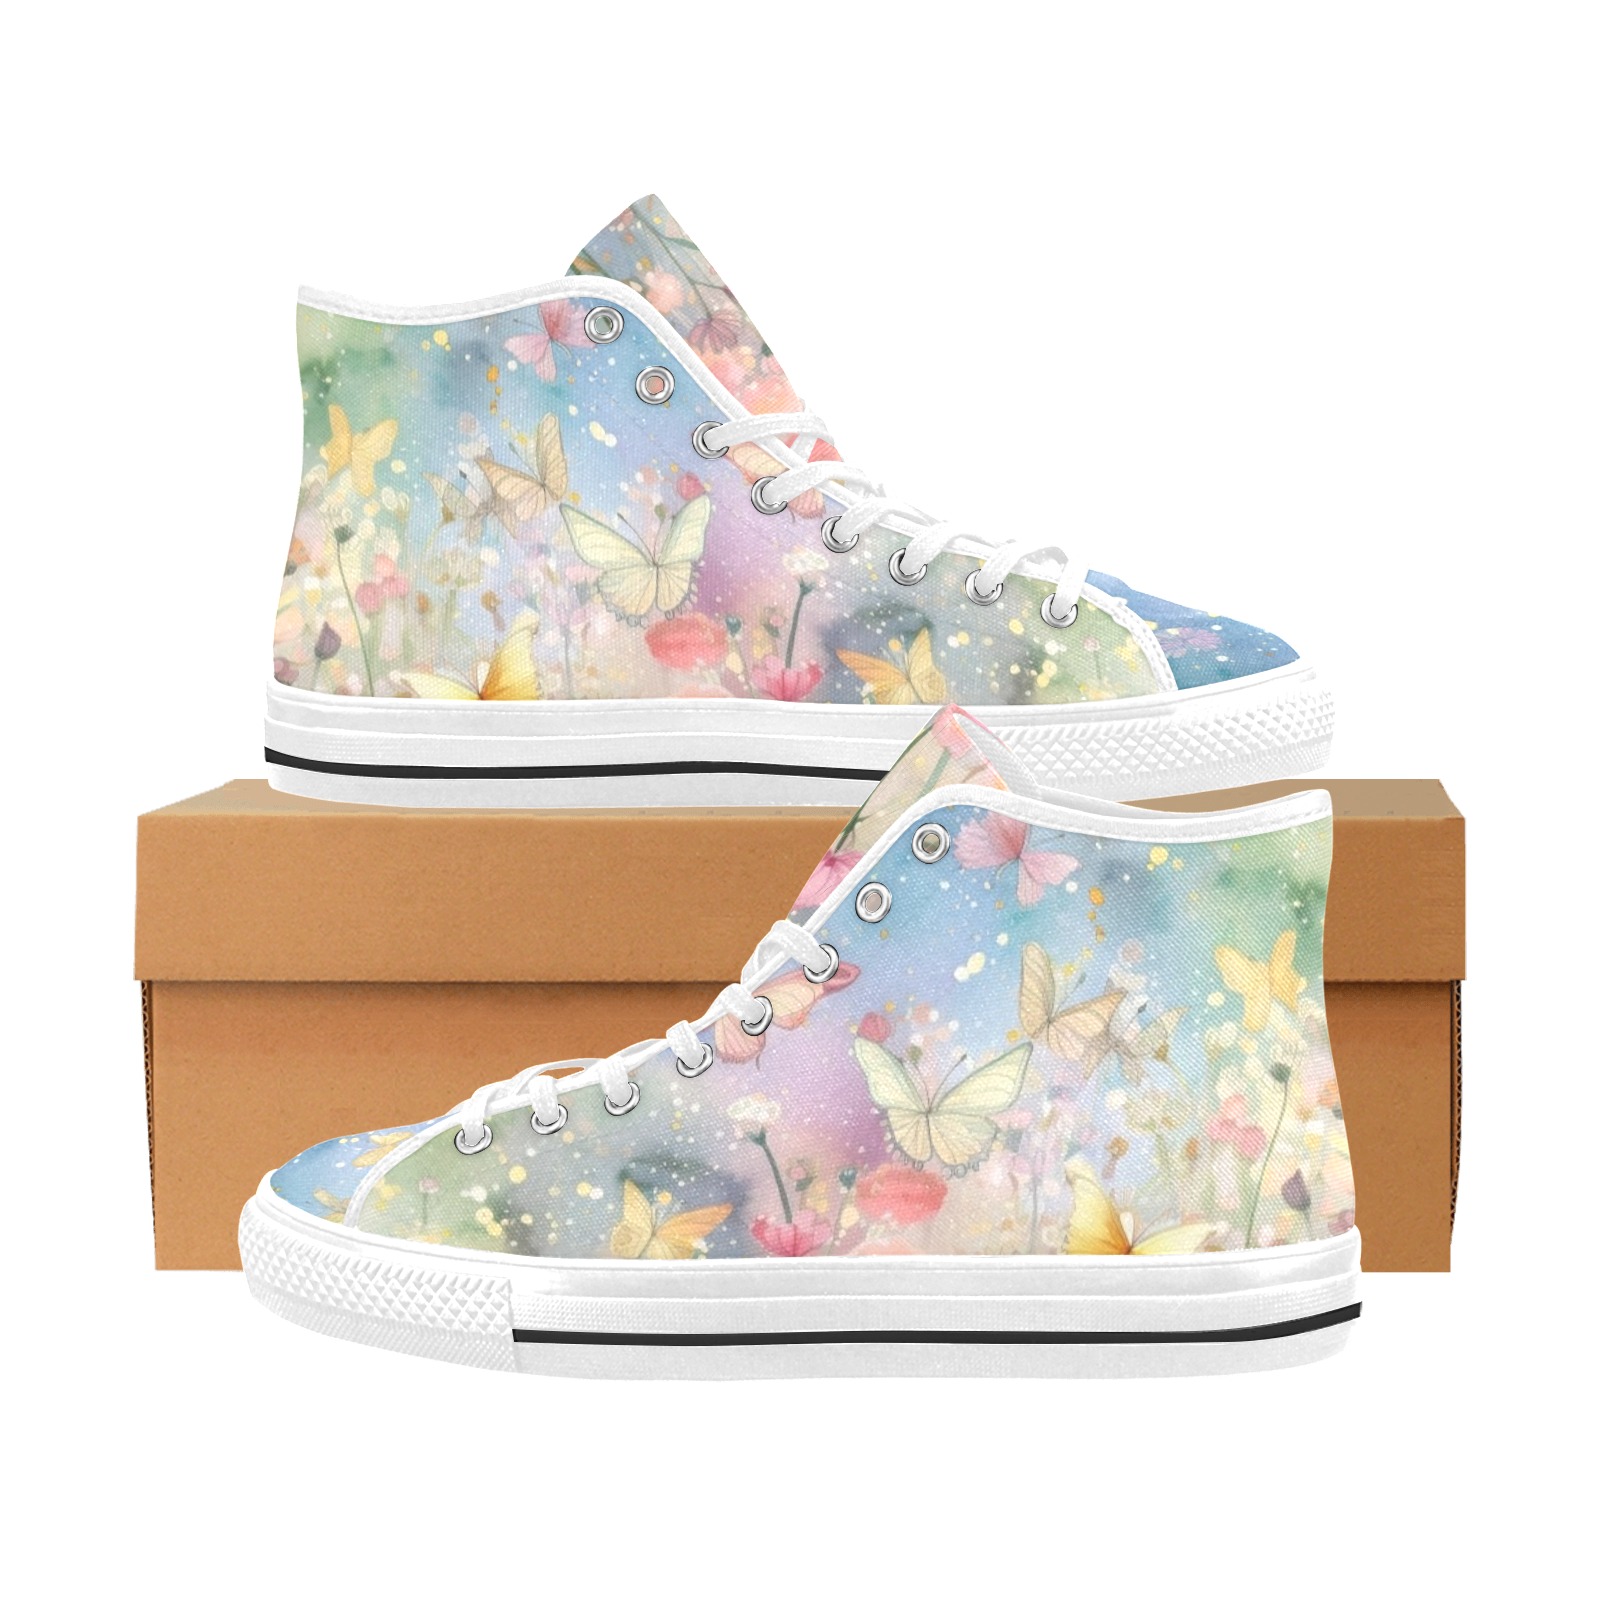 Wildflower Butterfly Meadow Vancouver H Women's Canvas Shoes (1013-1)